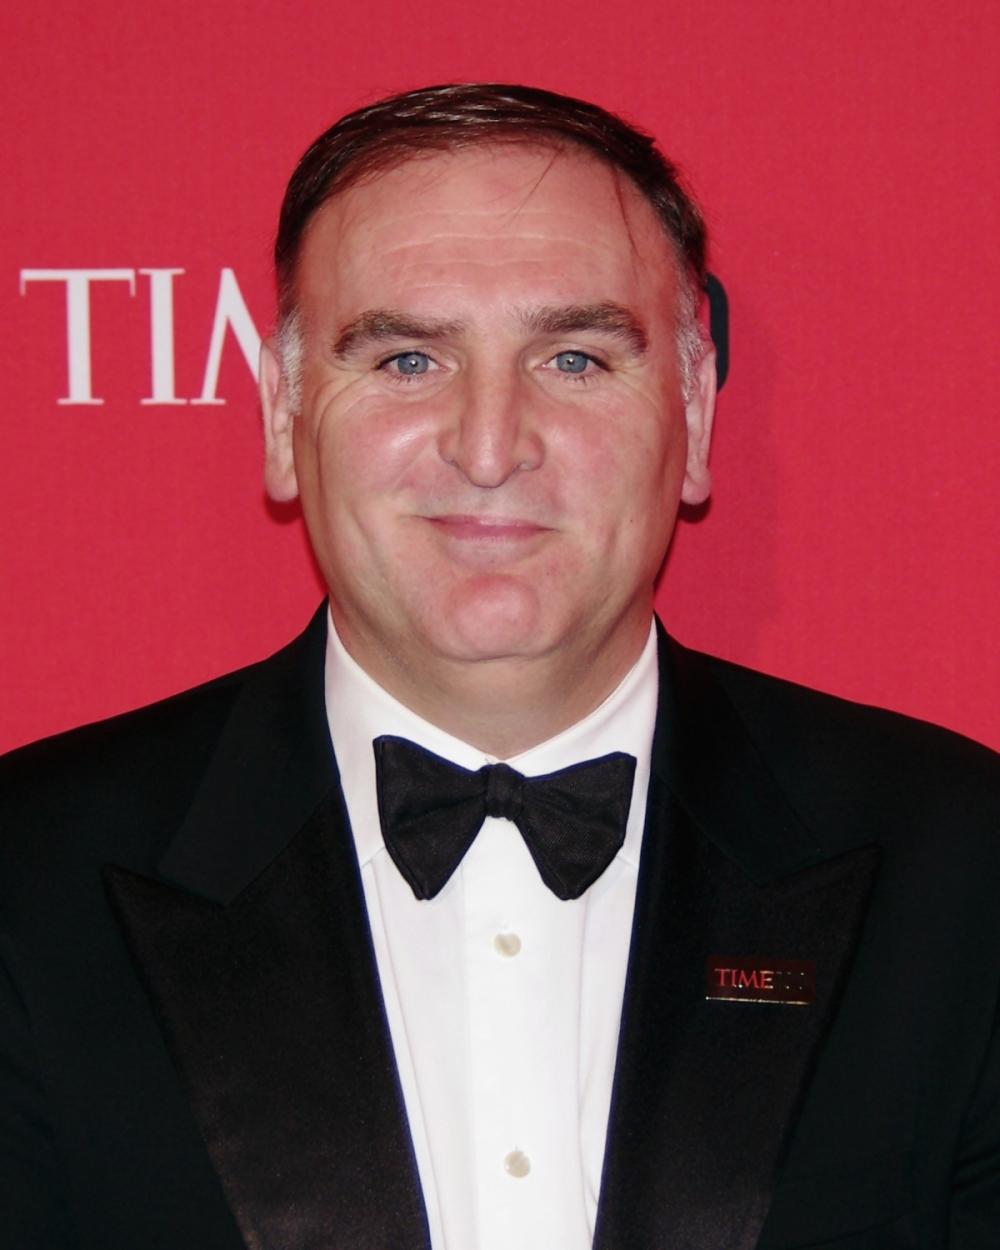 The Weekend Leader - Culinary celebrity Jose Andres launches food-focused content venture